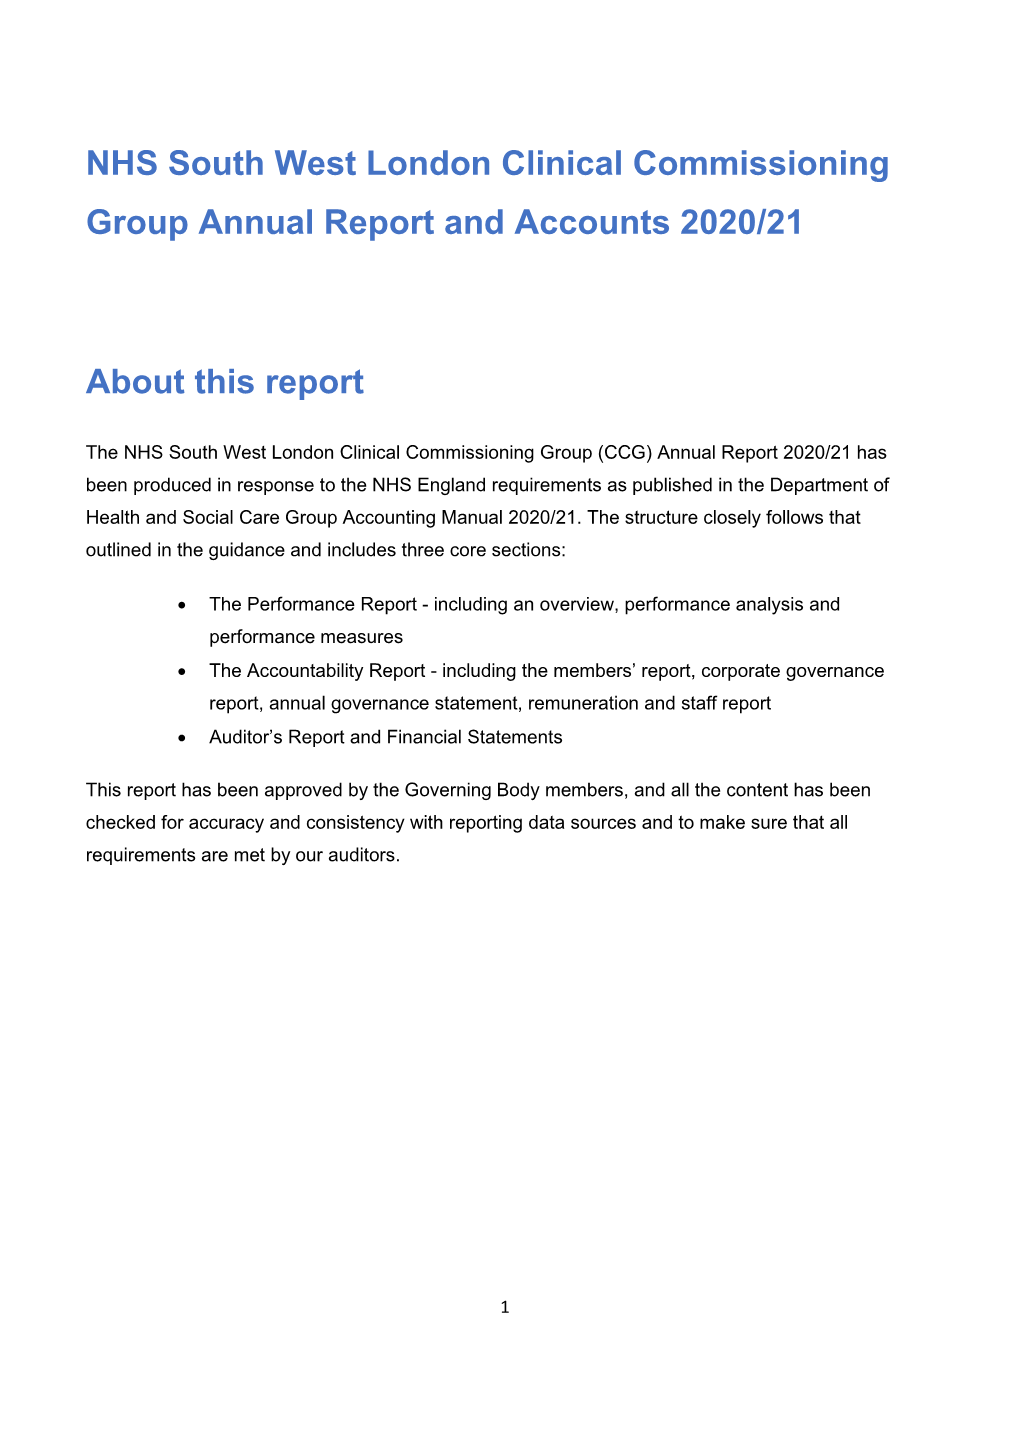 NHS South West London Clinical Commissioning Group Annual Report and Accounts 2020/21 About This Report